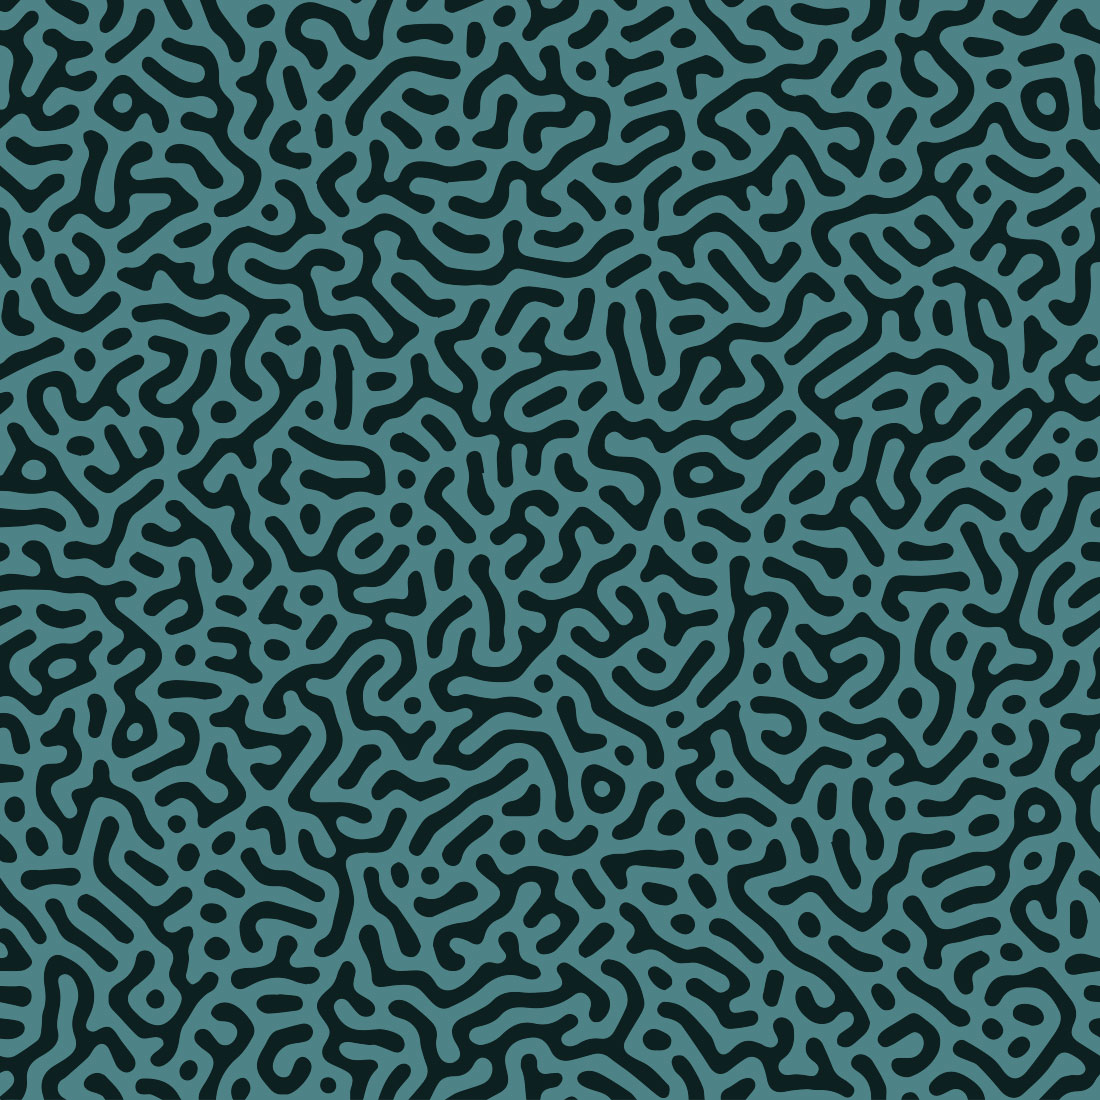 Use Organic Seamless Pattern for decorarion.